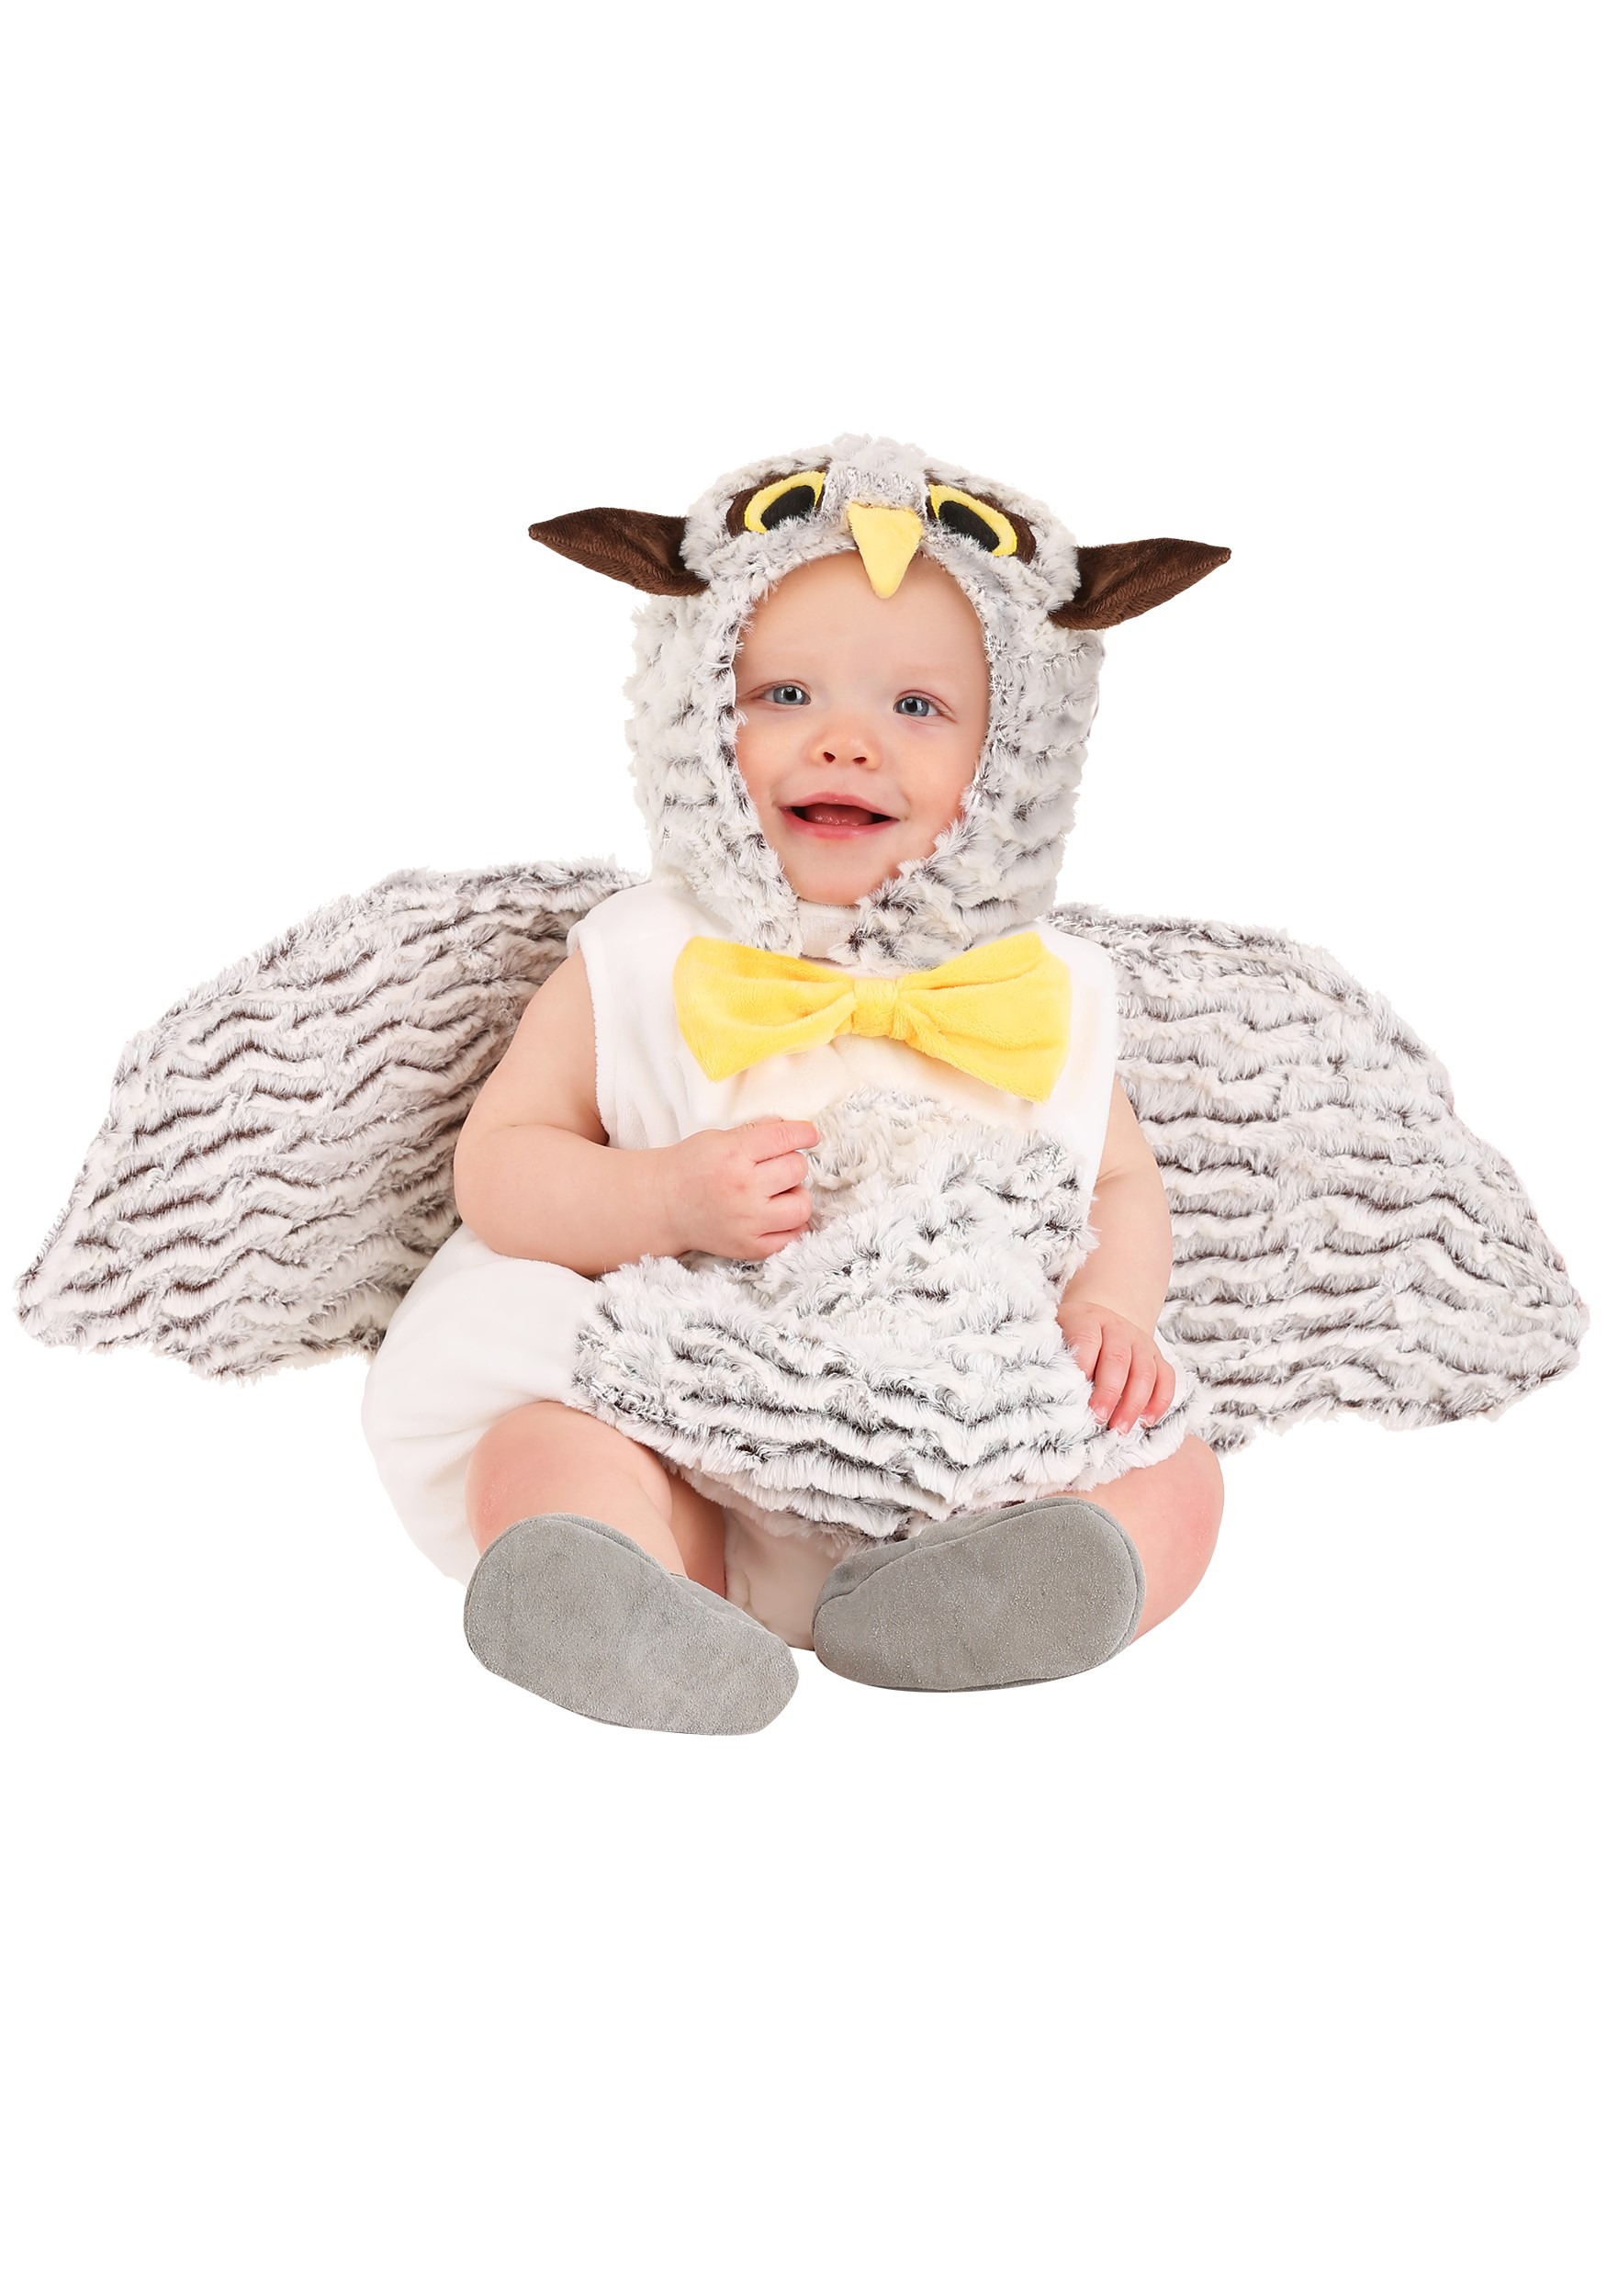 Photos - Fancy Dress Princess Paradise Oliver the Owl Infant Costume Gray/White/Yellow 